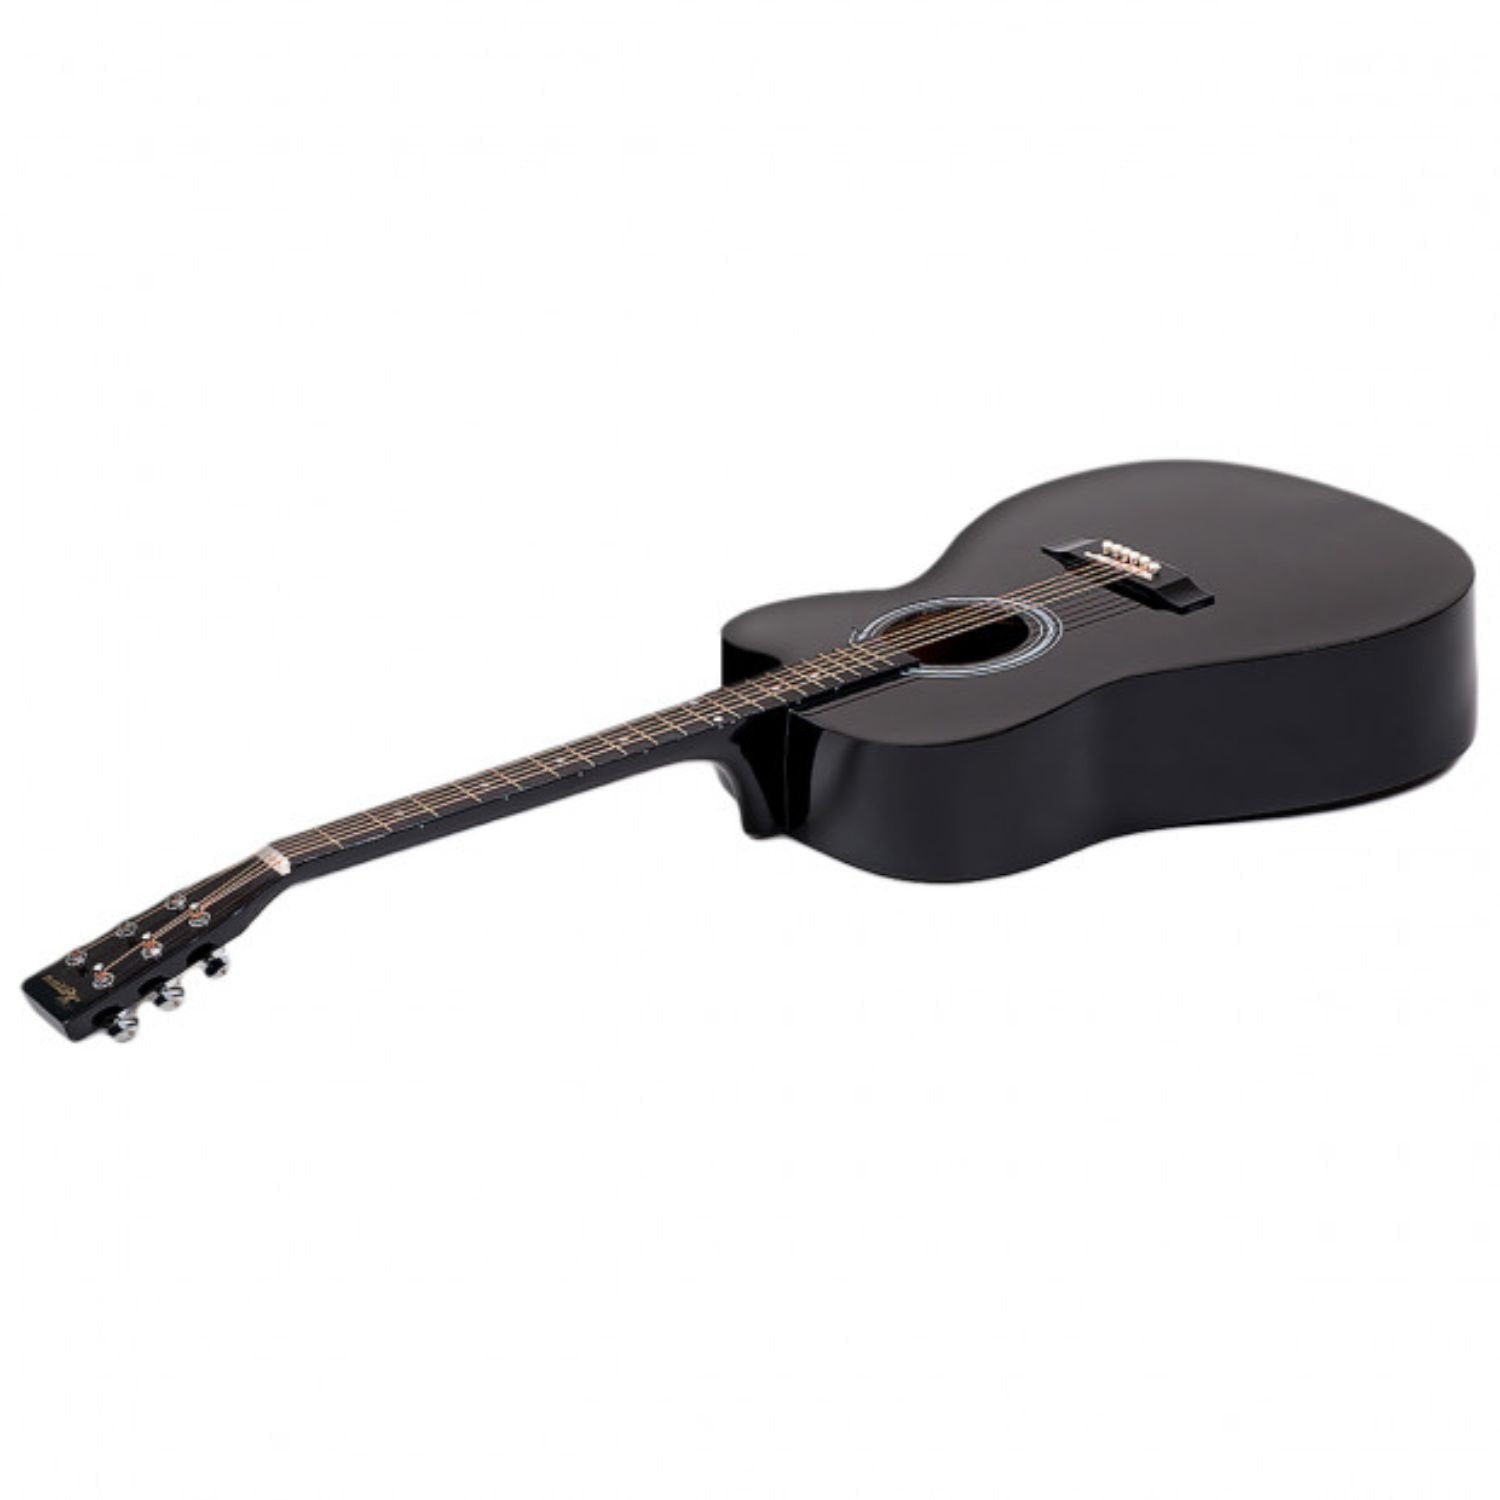 Karrera 38in Pro Cutaway Acoustic Guitar with Carry Bag - Black - 0